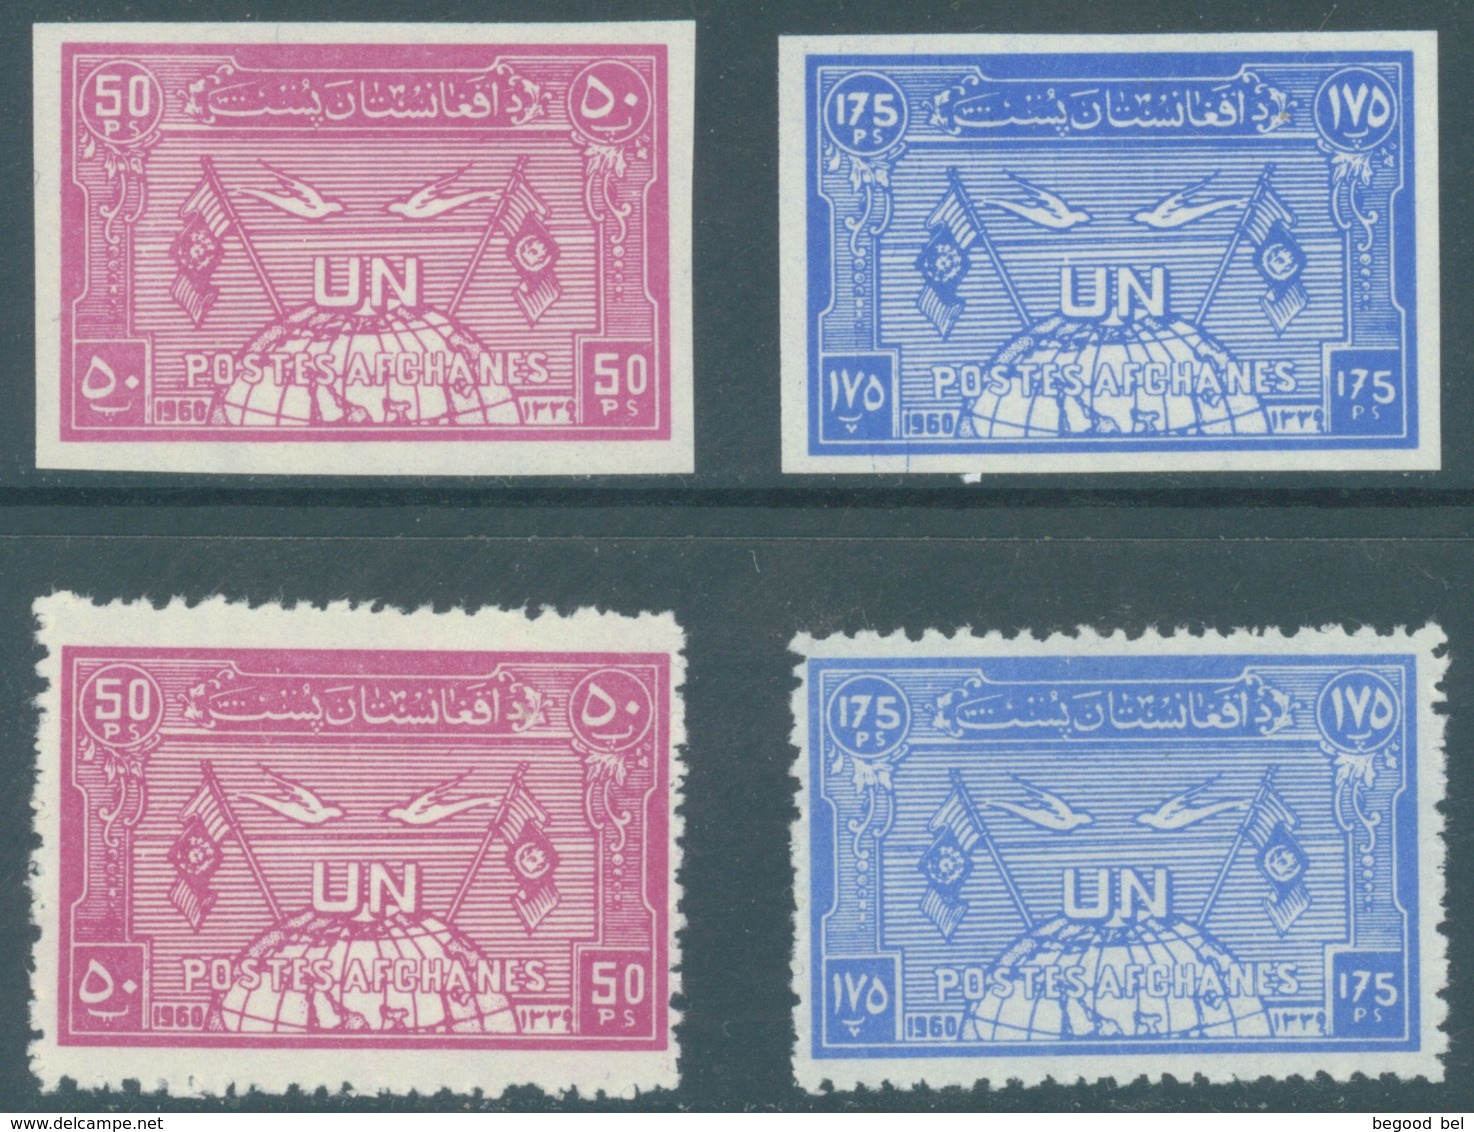 AFGHANISTAN - MNH/*** LUXE - 1960 - UNO ONU PERFORATED AND IMPERFORATED  - Mi 504 A - 505 B - Yv 506 - 507 -  Lot 19027 - Afghanistan